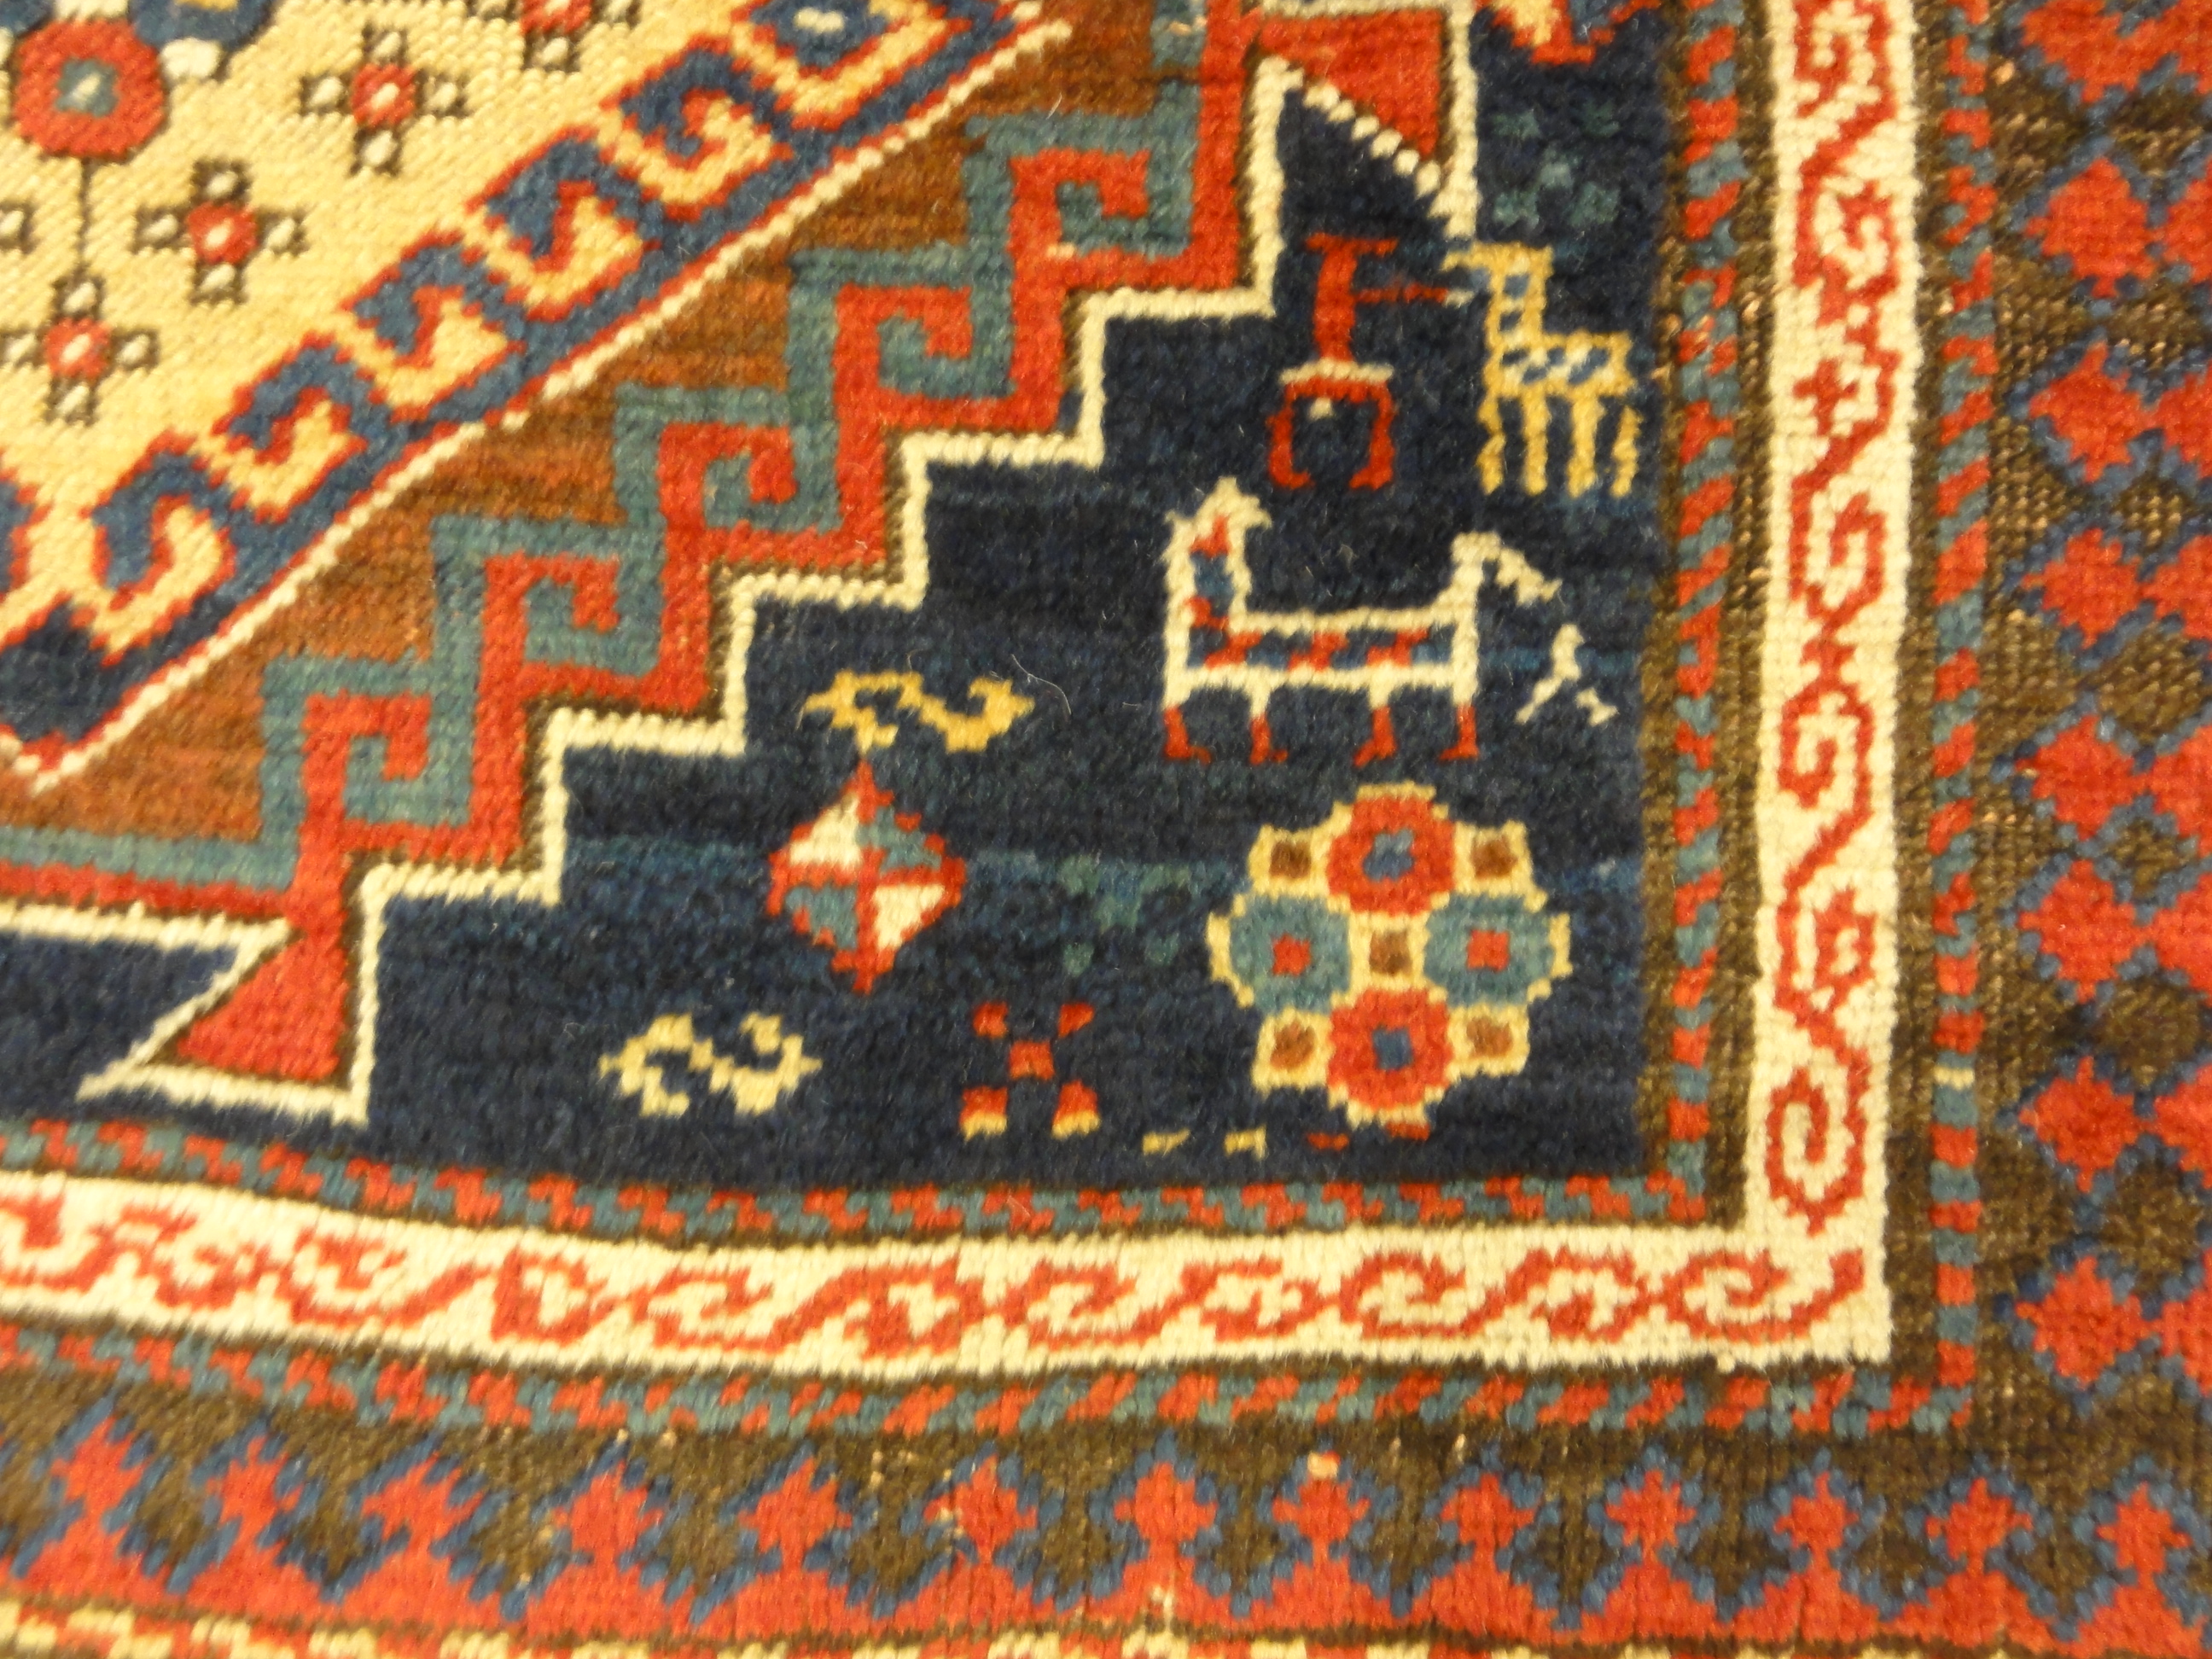 Caucasian Marriage Rug From 1880s. A piece of genuine antique woven carpet art sold by the Santa Barbara Design Center, Rugs and More.